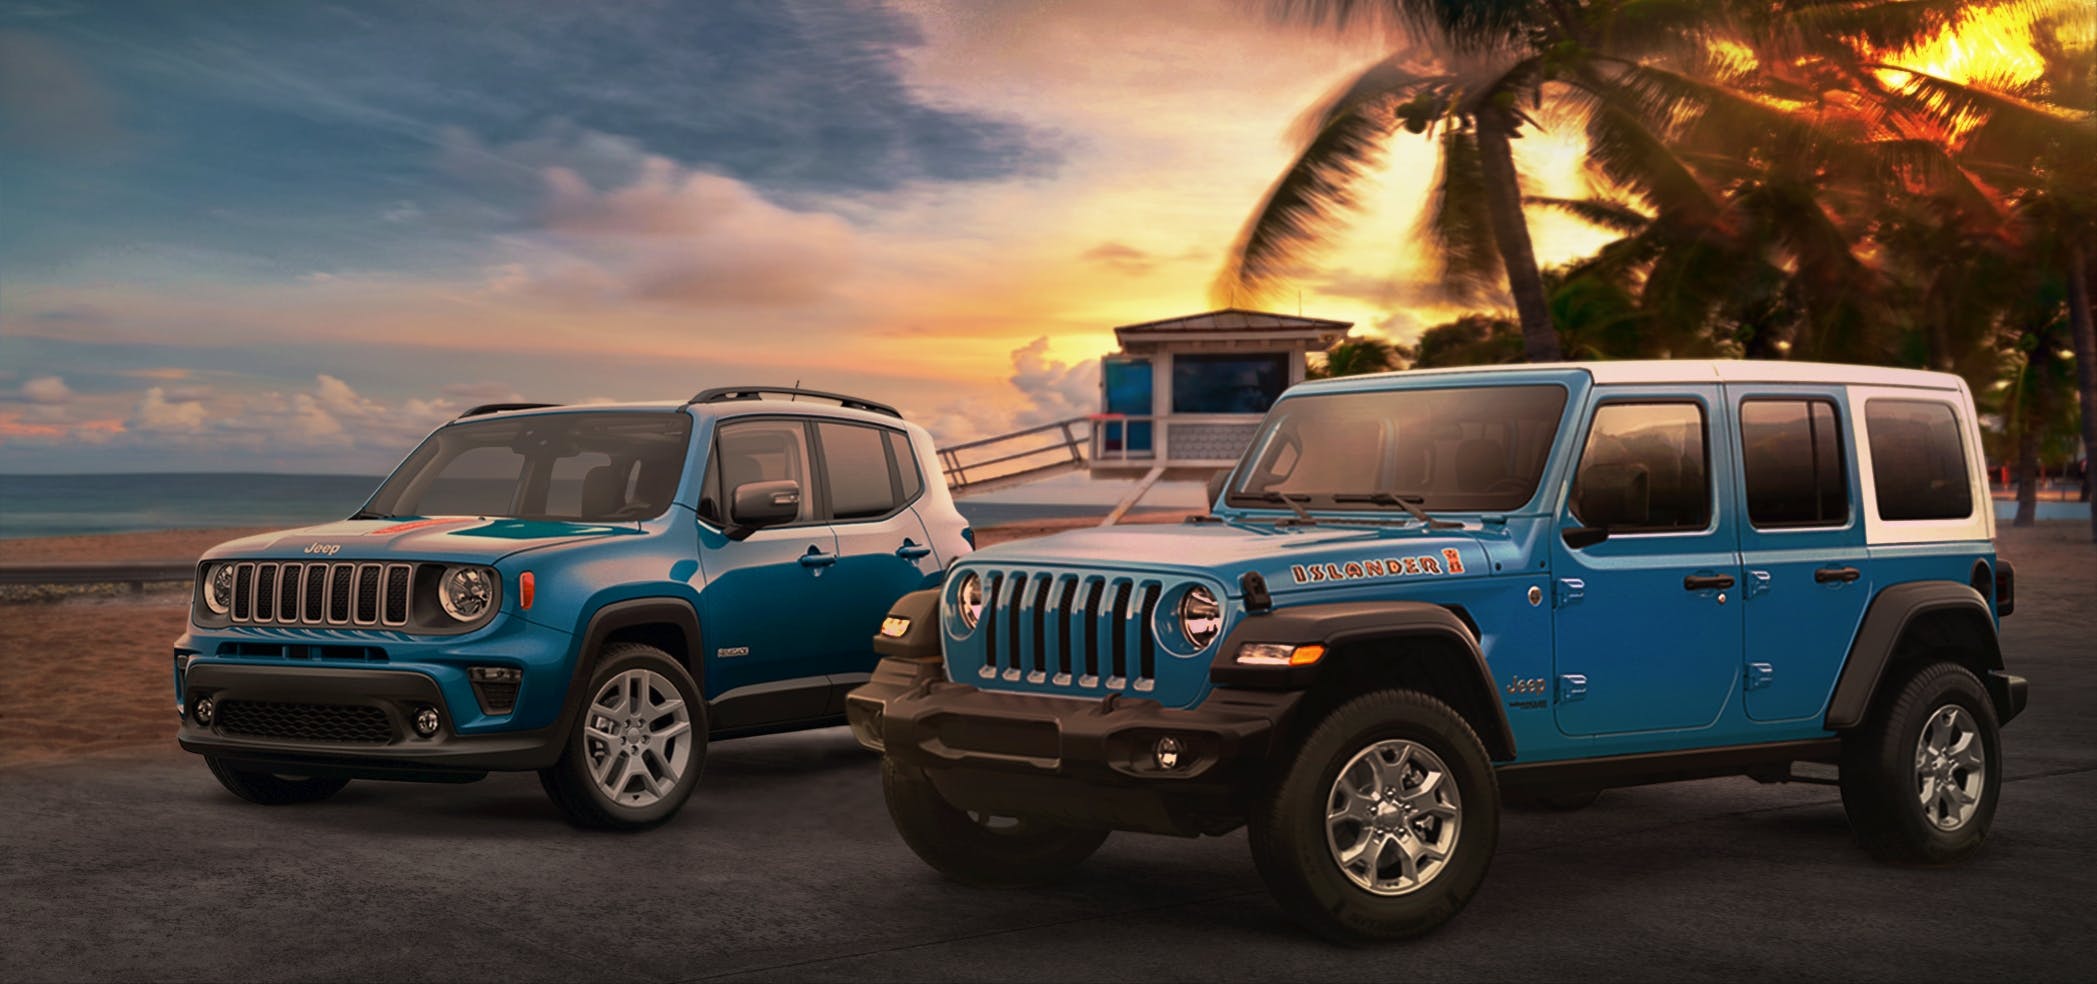 Islander trim returns to Jeep lineup after an 11-year vacation - Hagerty  Media